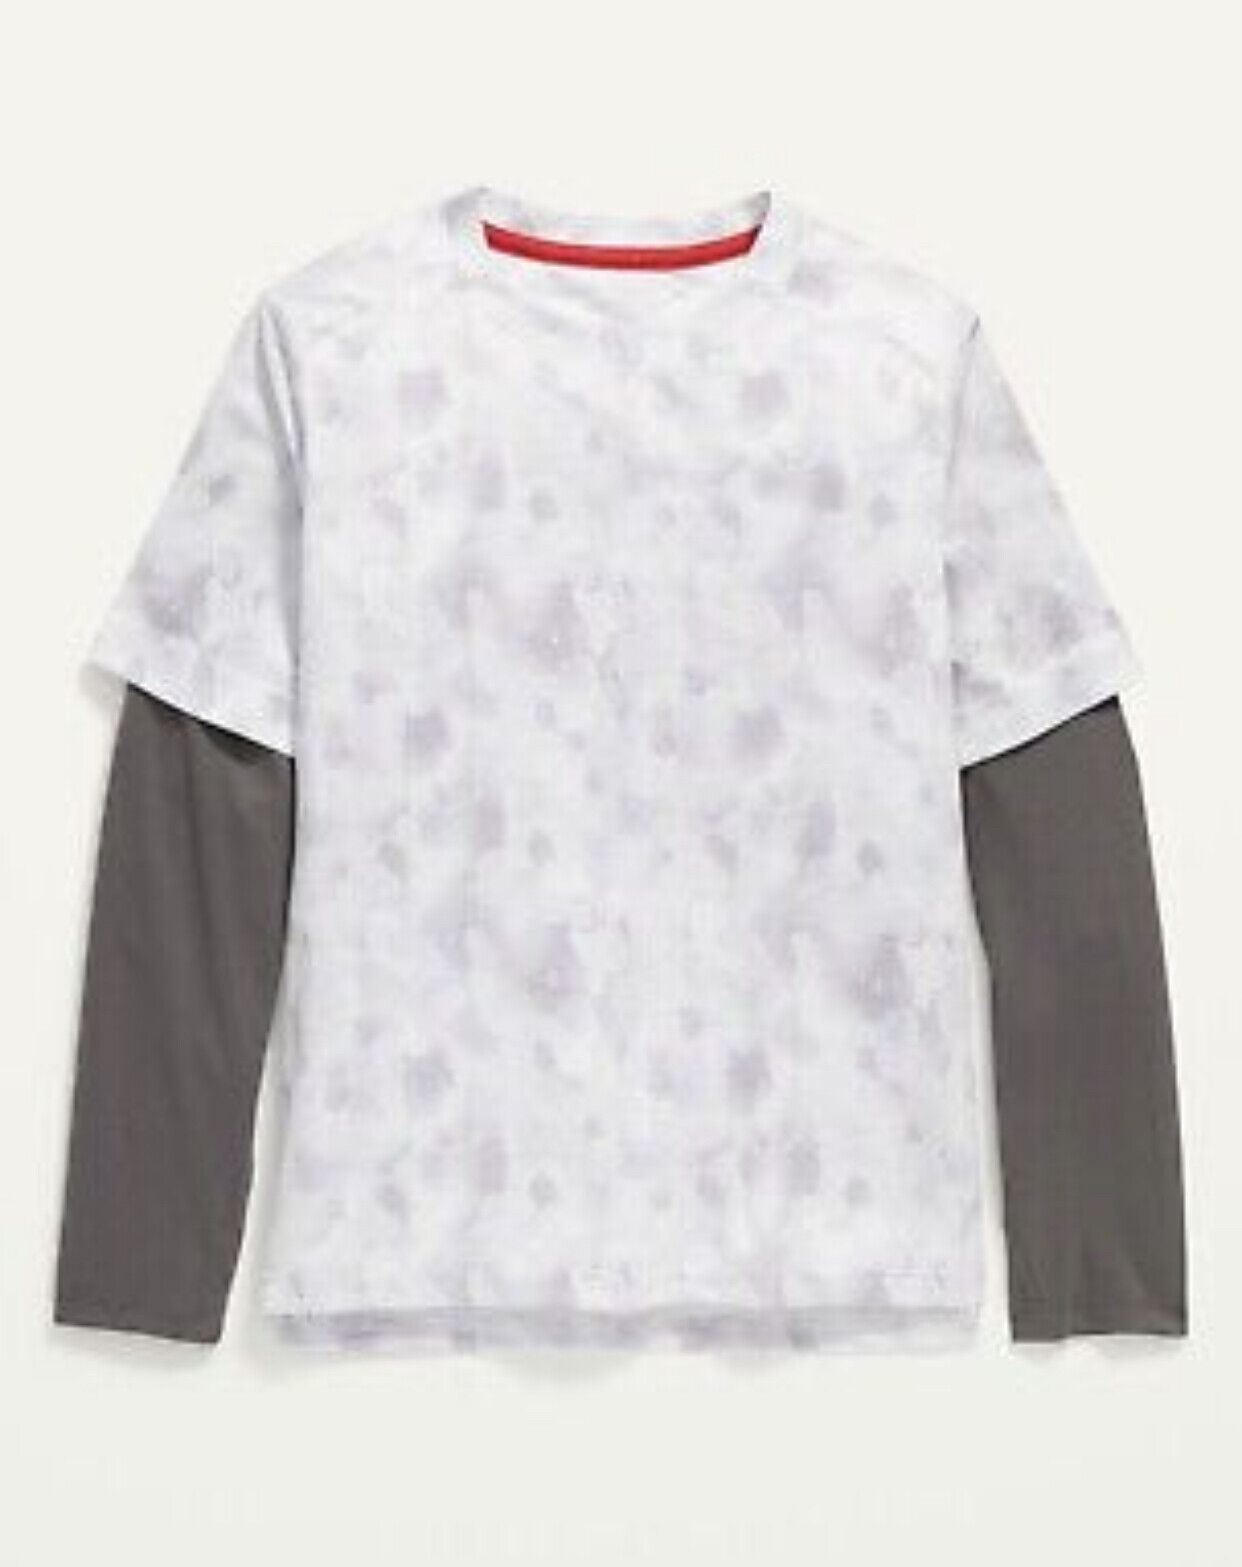 Old Navy Kids Size XL (14-16) Go-Dry 2-in-1 Performance Mesh Long Sleeve T-Shirt